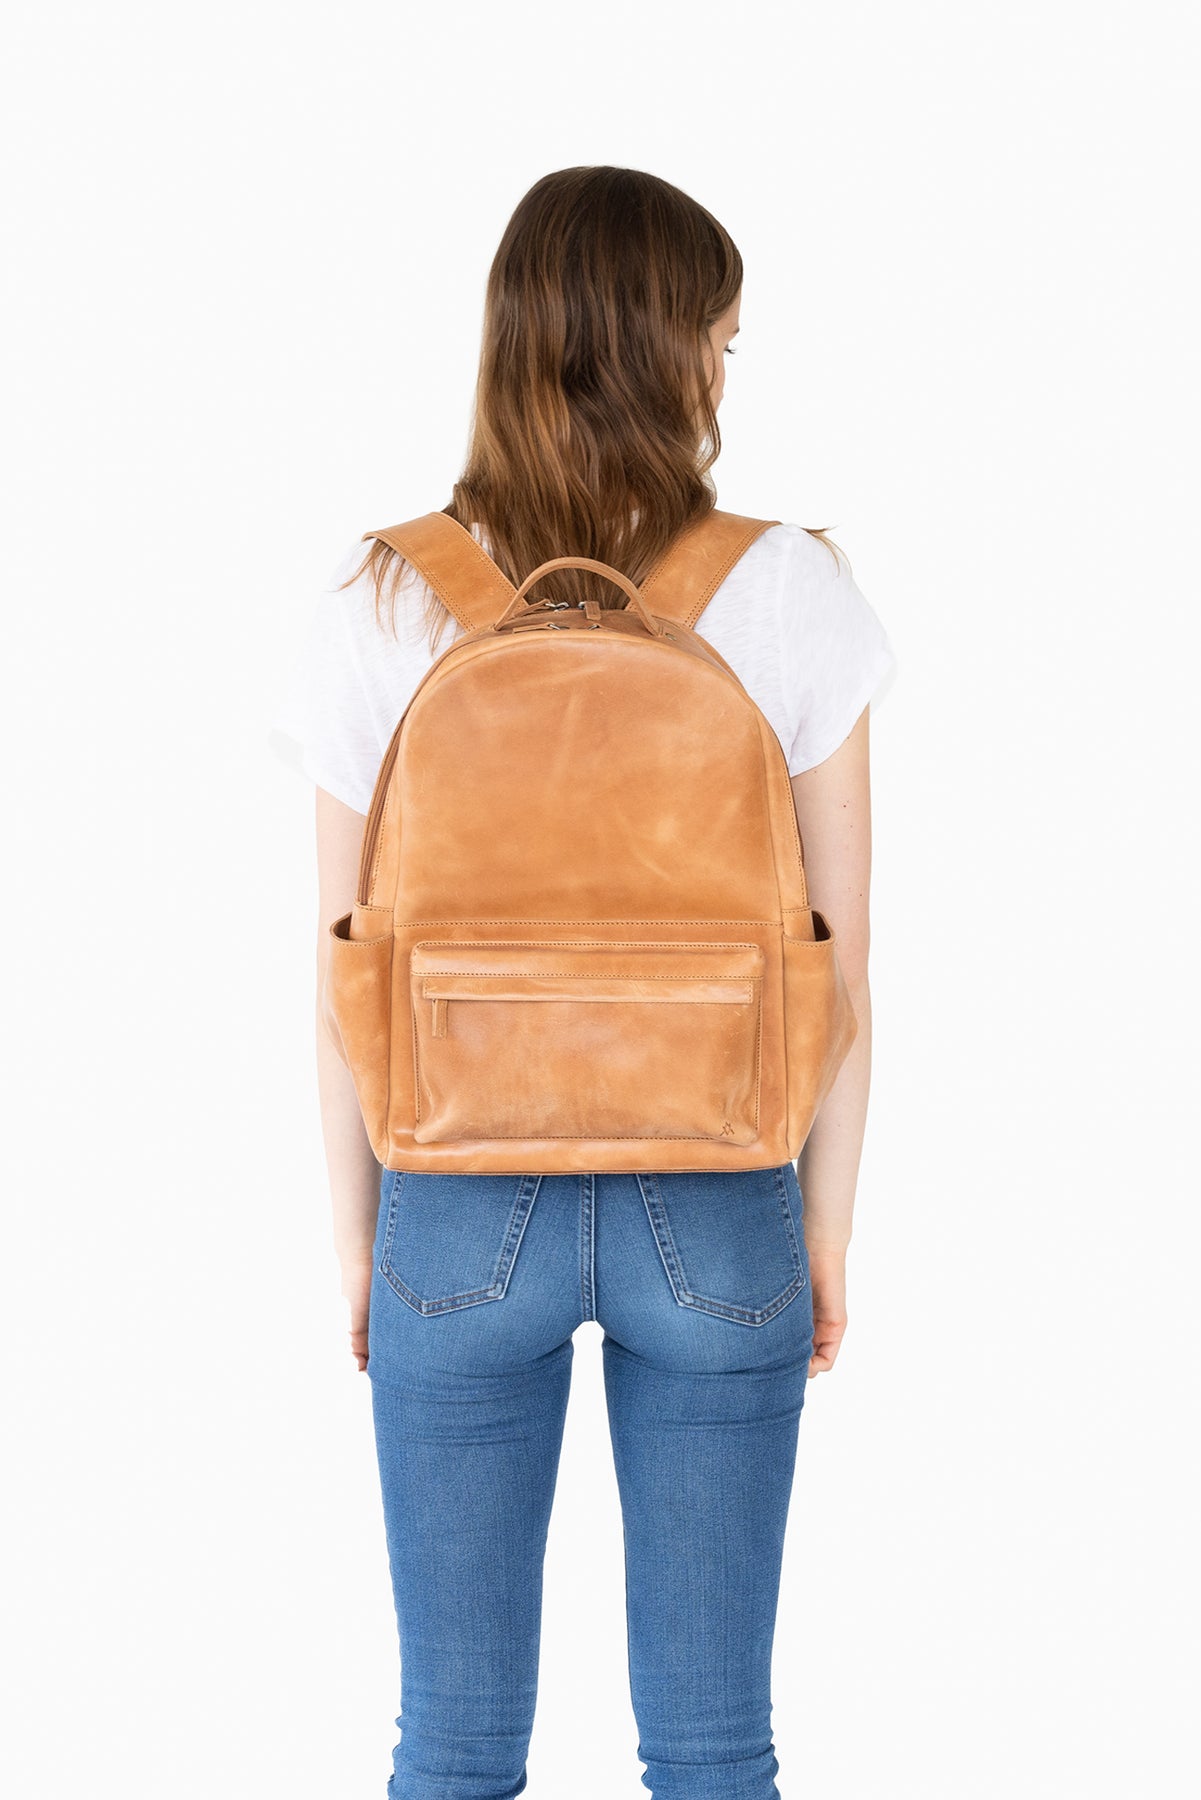 Upgrade your backpack choice in luxurious Parisian style with this black  number from, UhfmrShops